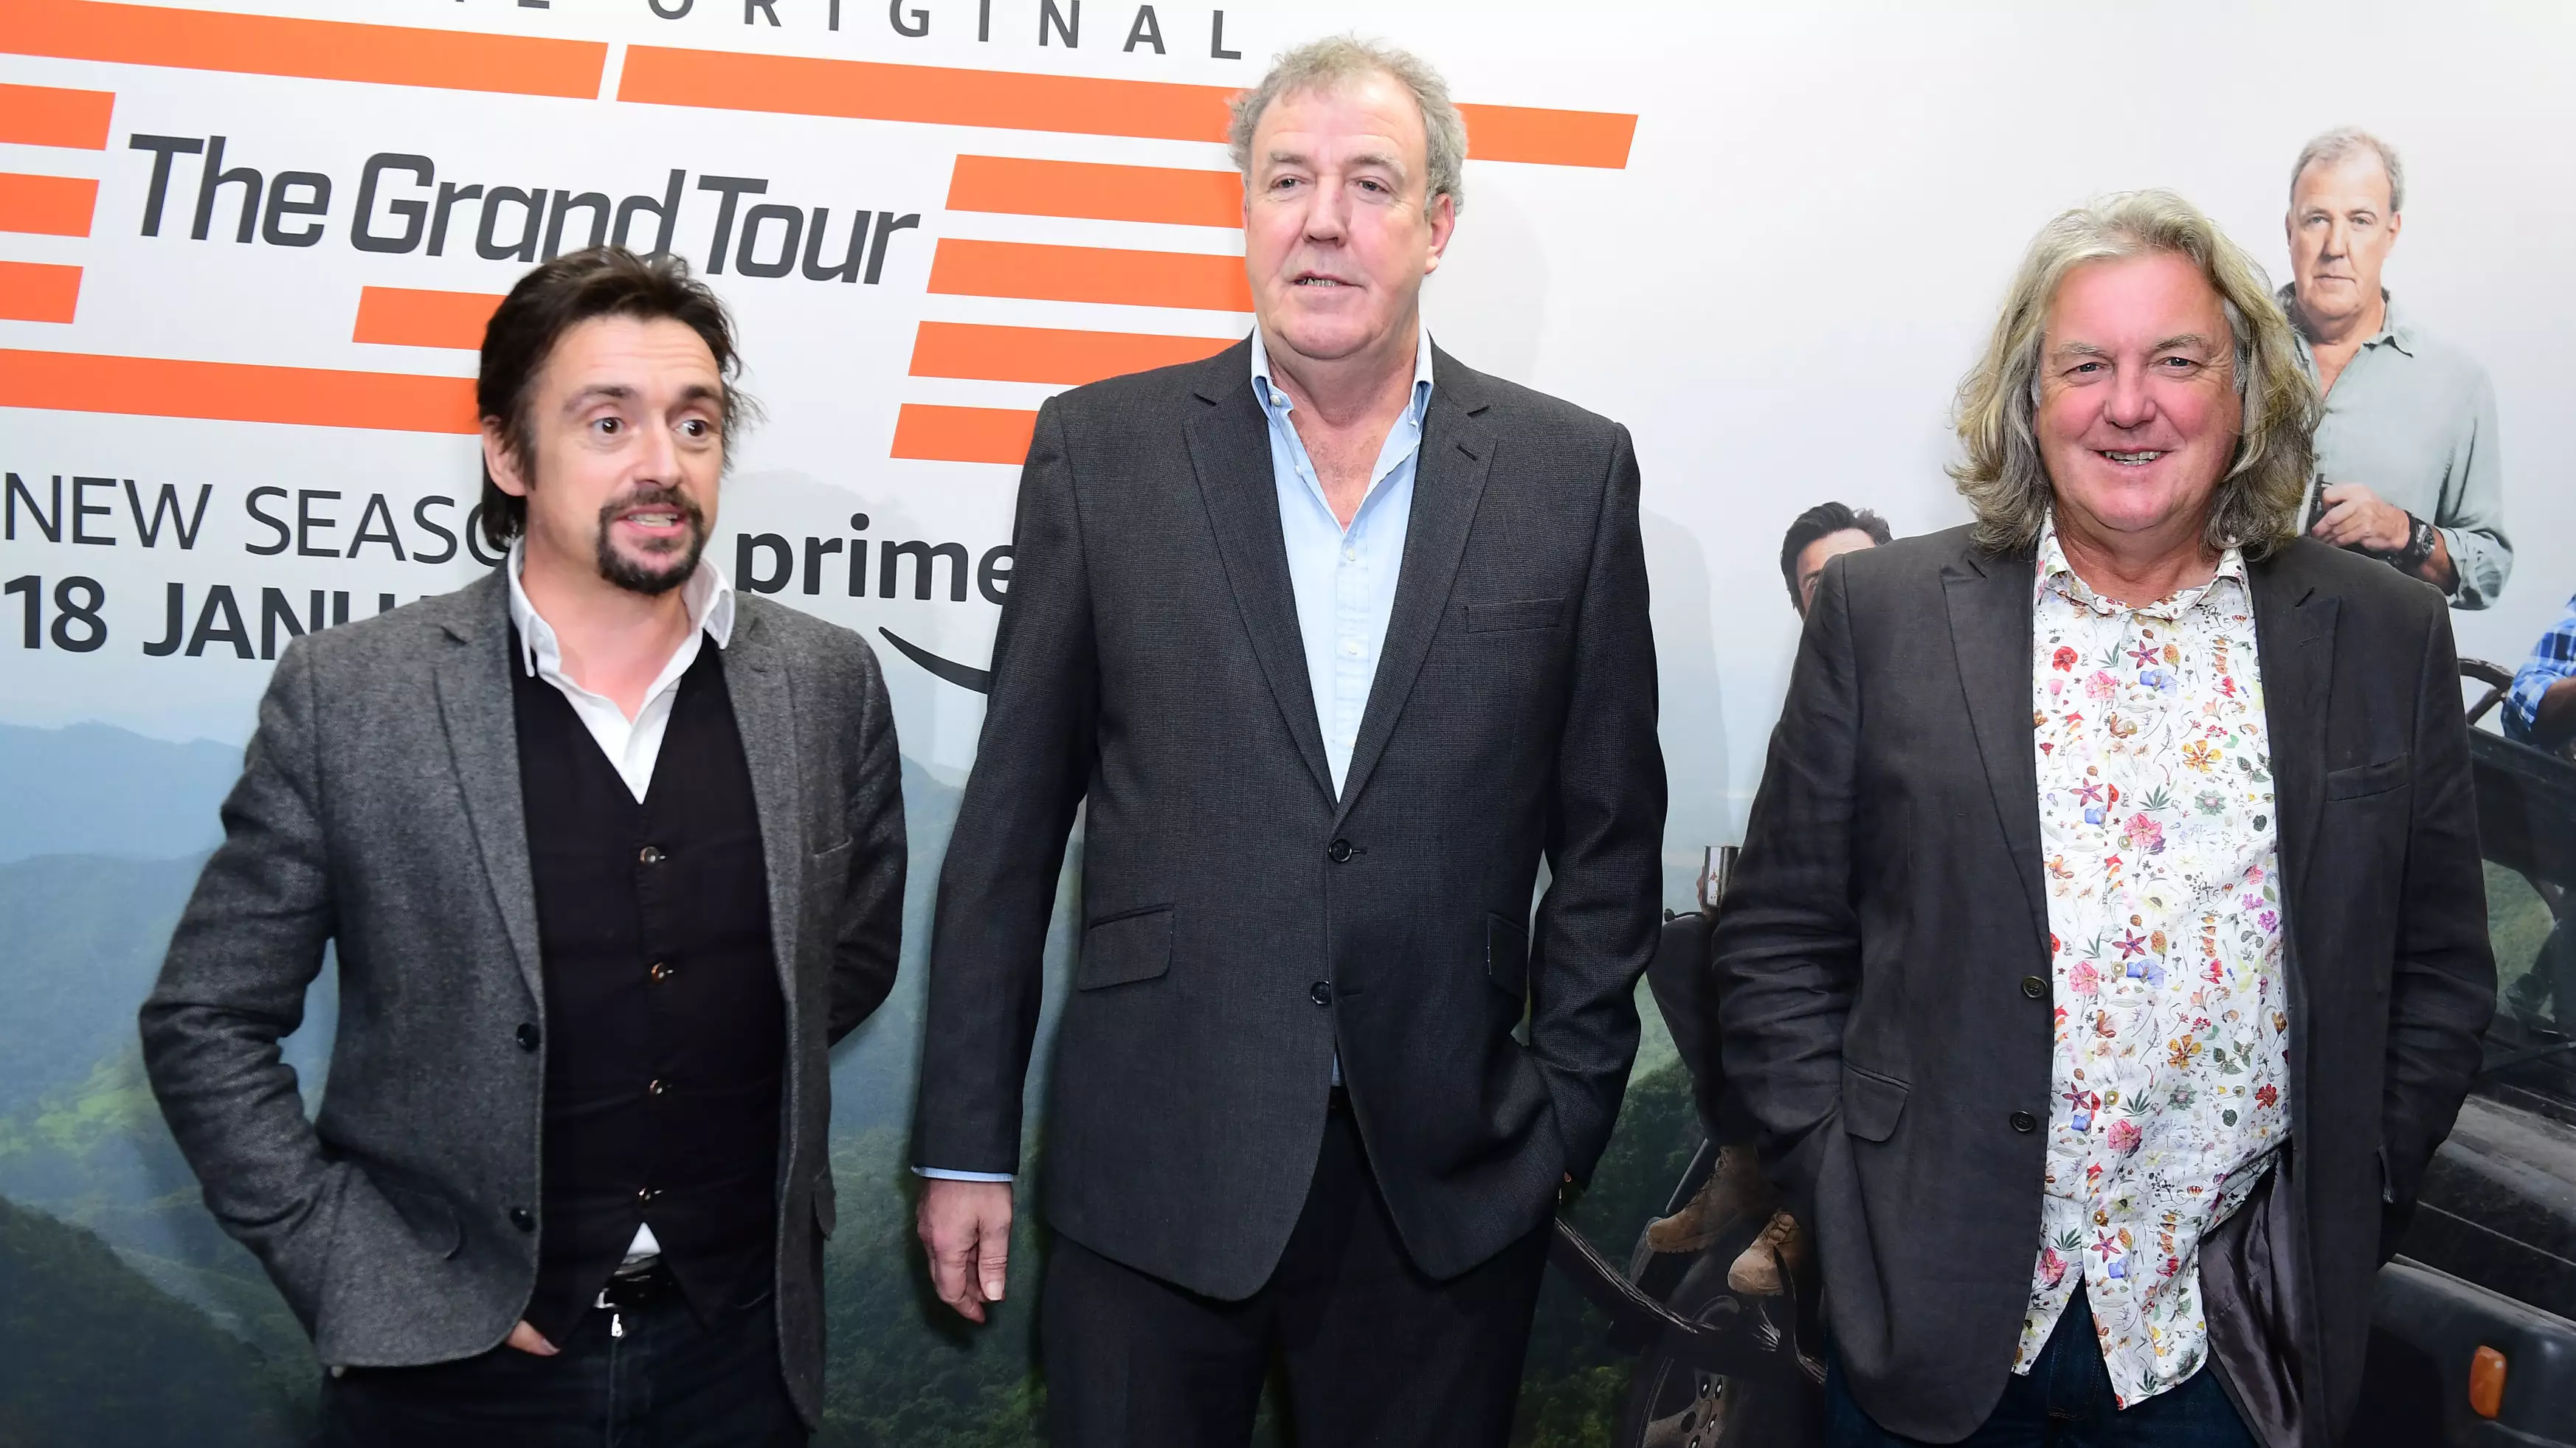 Jeremy Clarkson Nearly Got Attacked By Sharks When Filming The Grand Tour